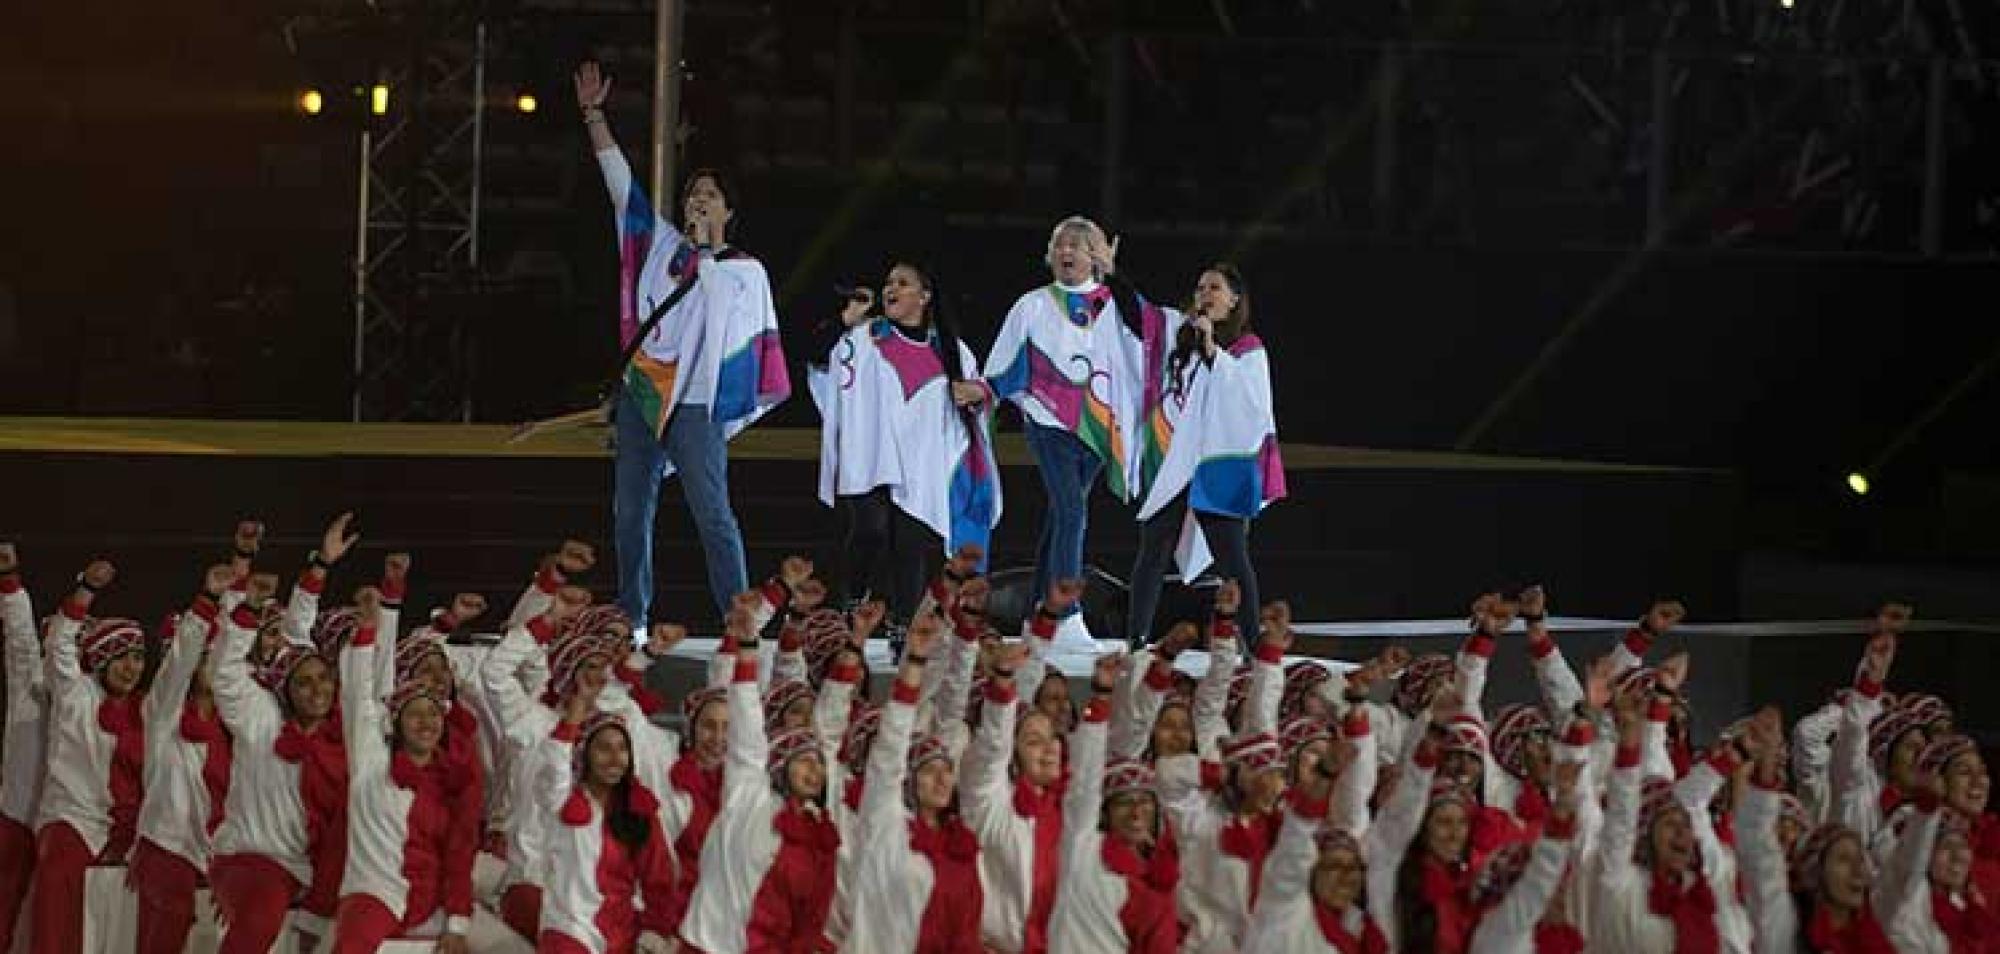 The Dance Ends, the Pan American Games Party Begins